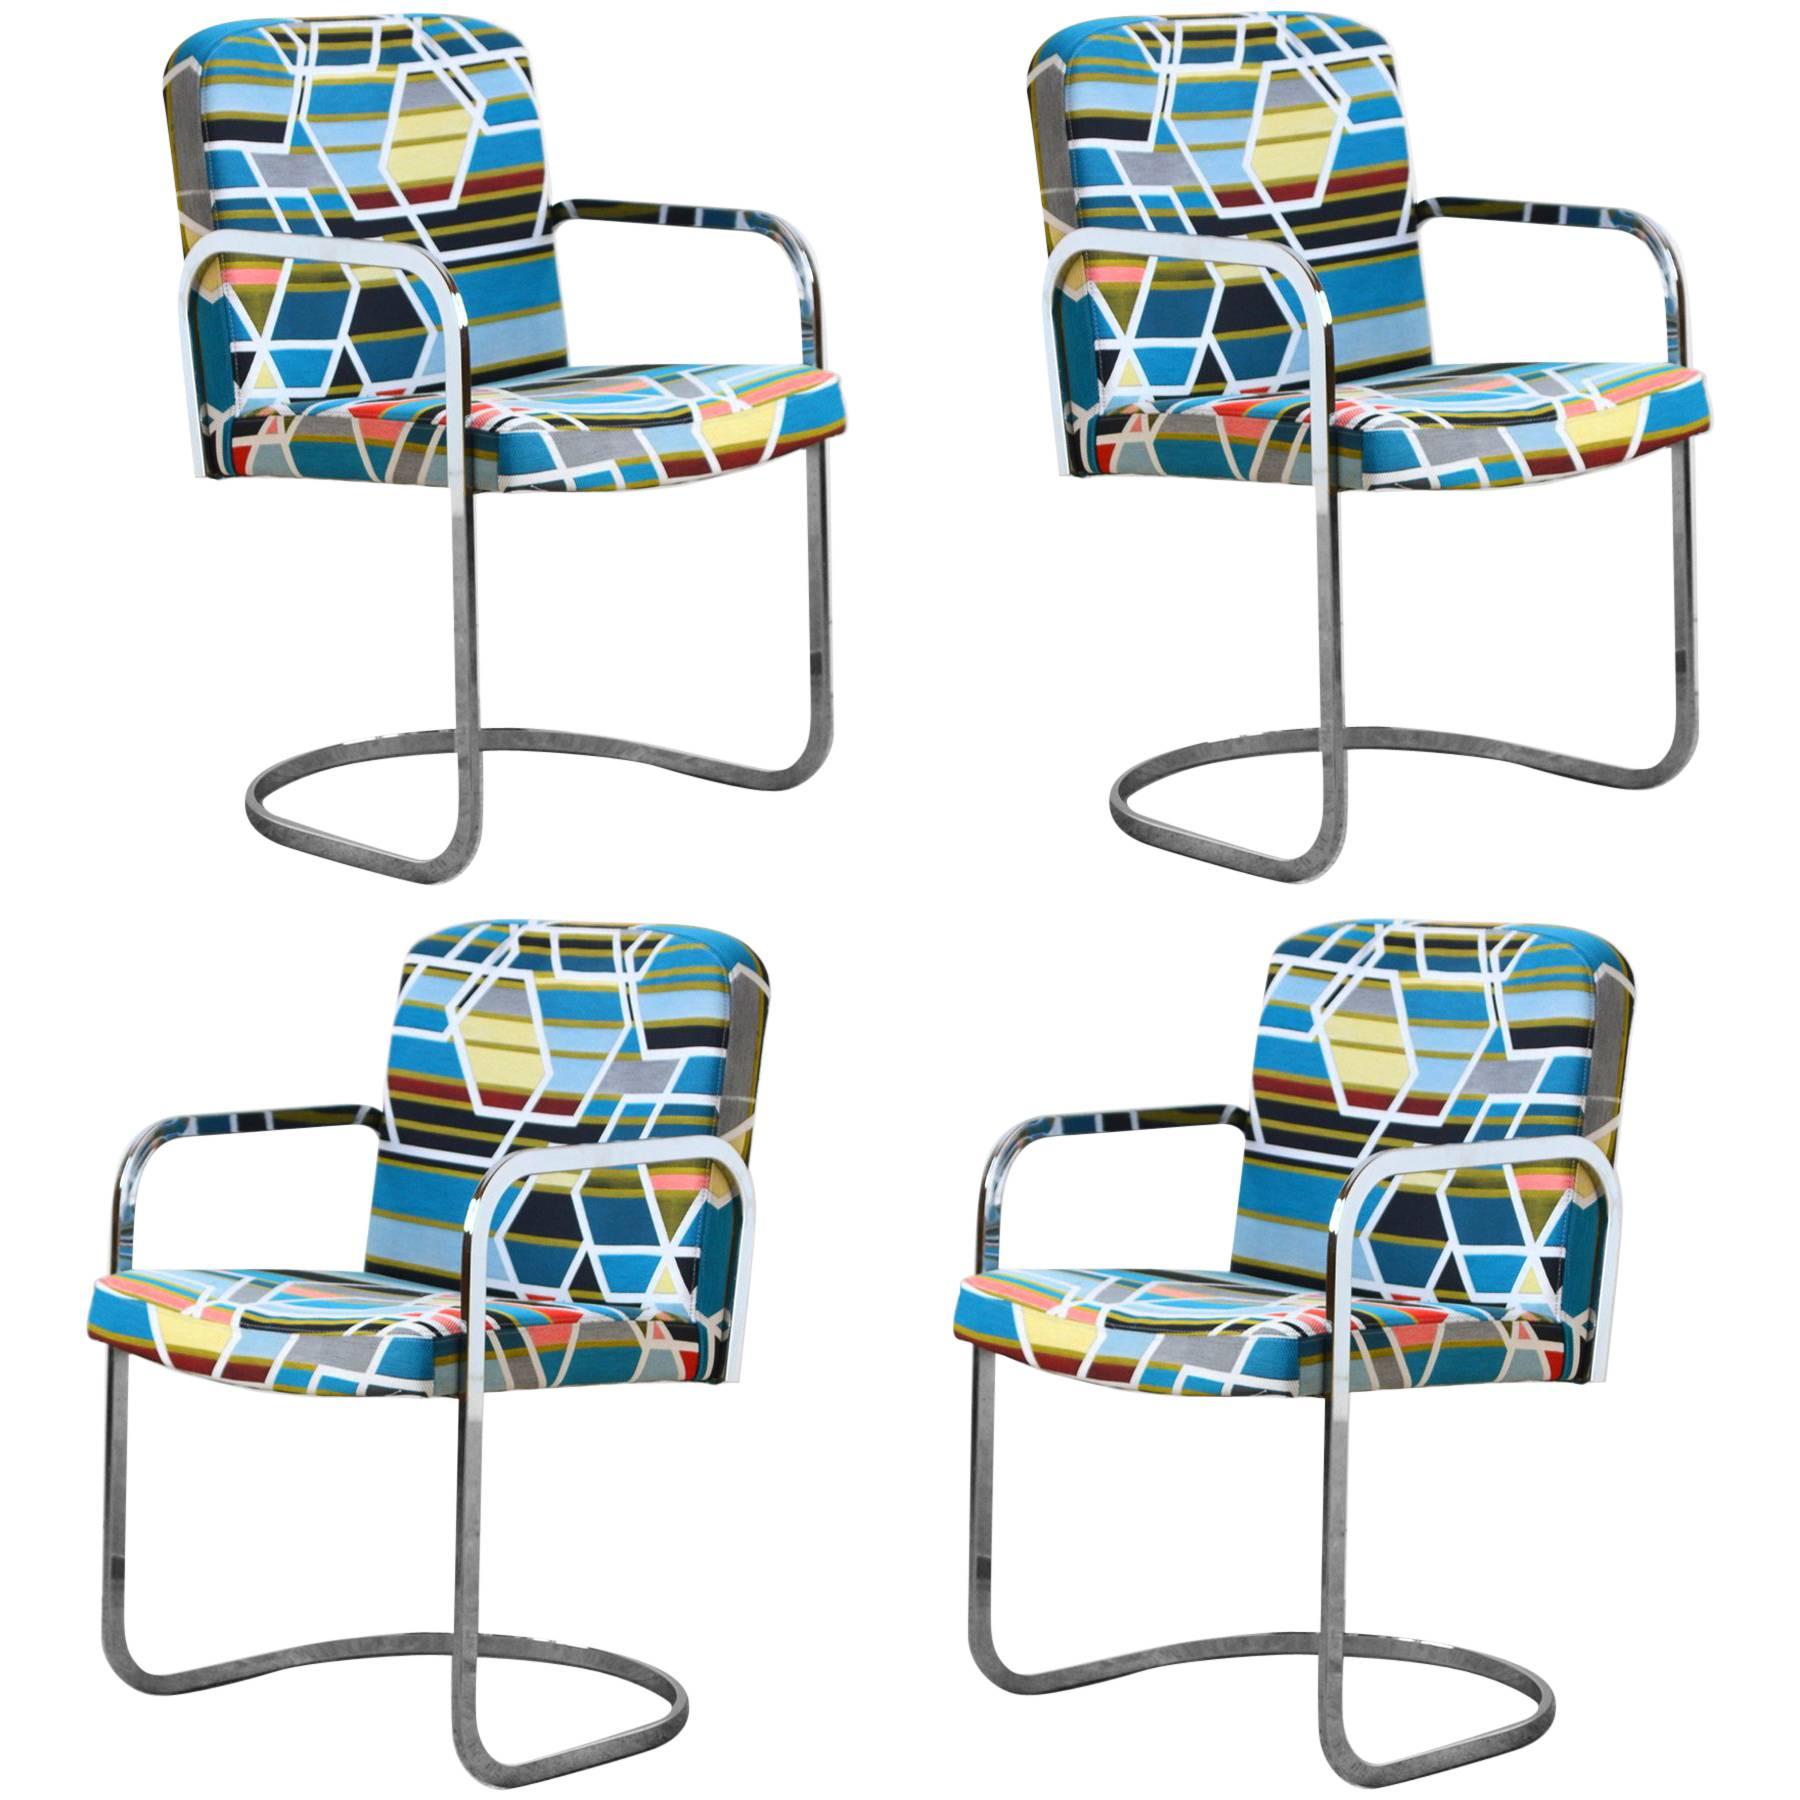 Design Institute America Set of Four Chairs with Maharam Fabric